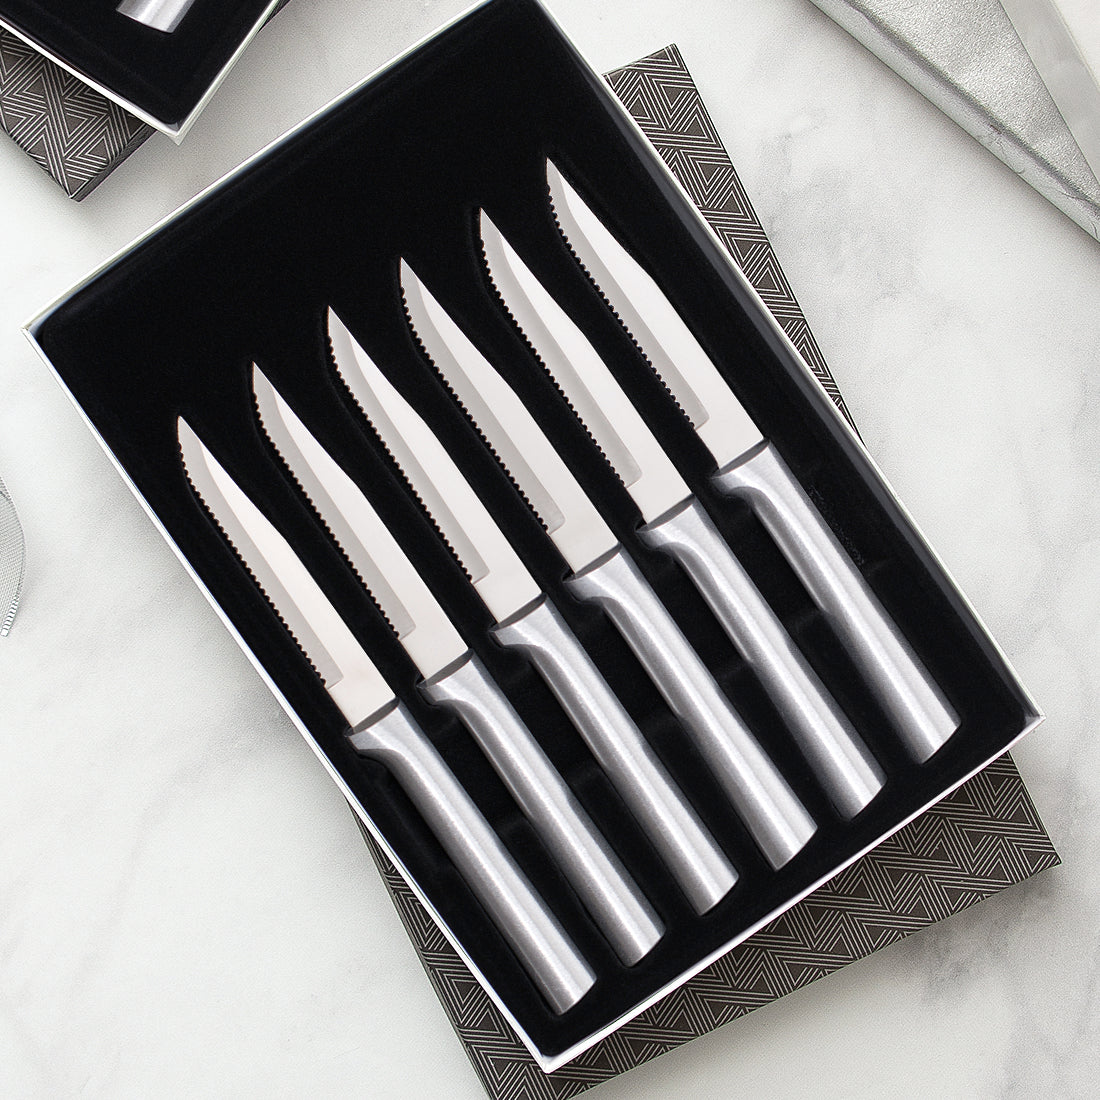 Rada Cutlery Six Serrated Steak Knives Gift Set with silver handles in a gift box